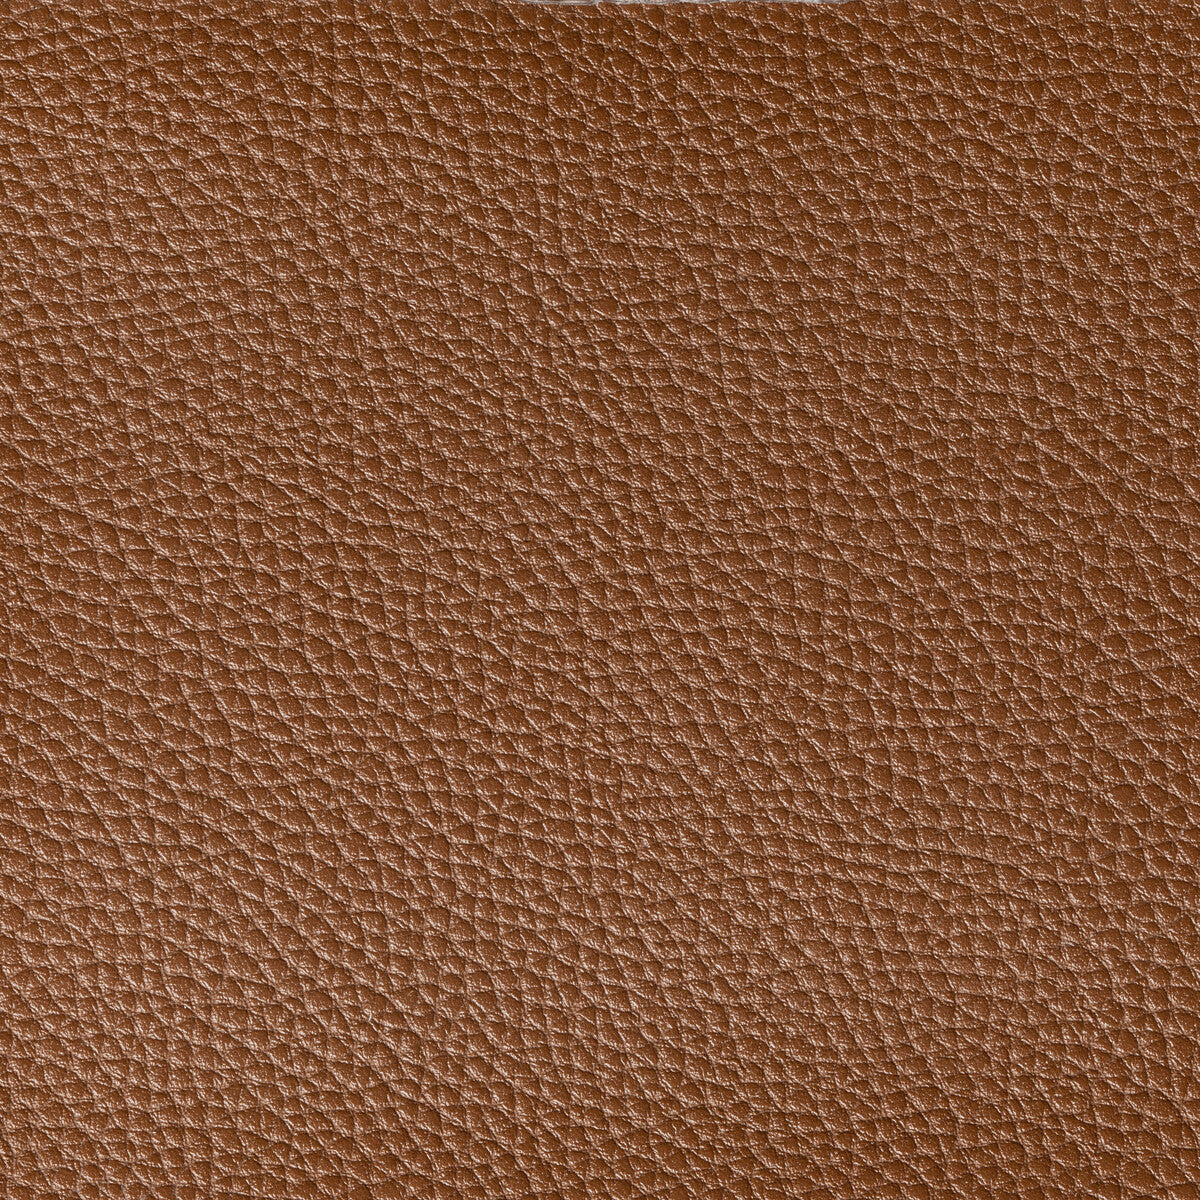 Boone fabric in saddle color - pattern BOONE.40.0 - by Kravet Contract in the Foundations / Value collection